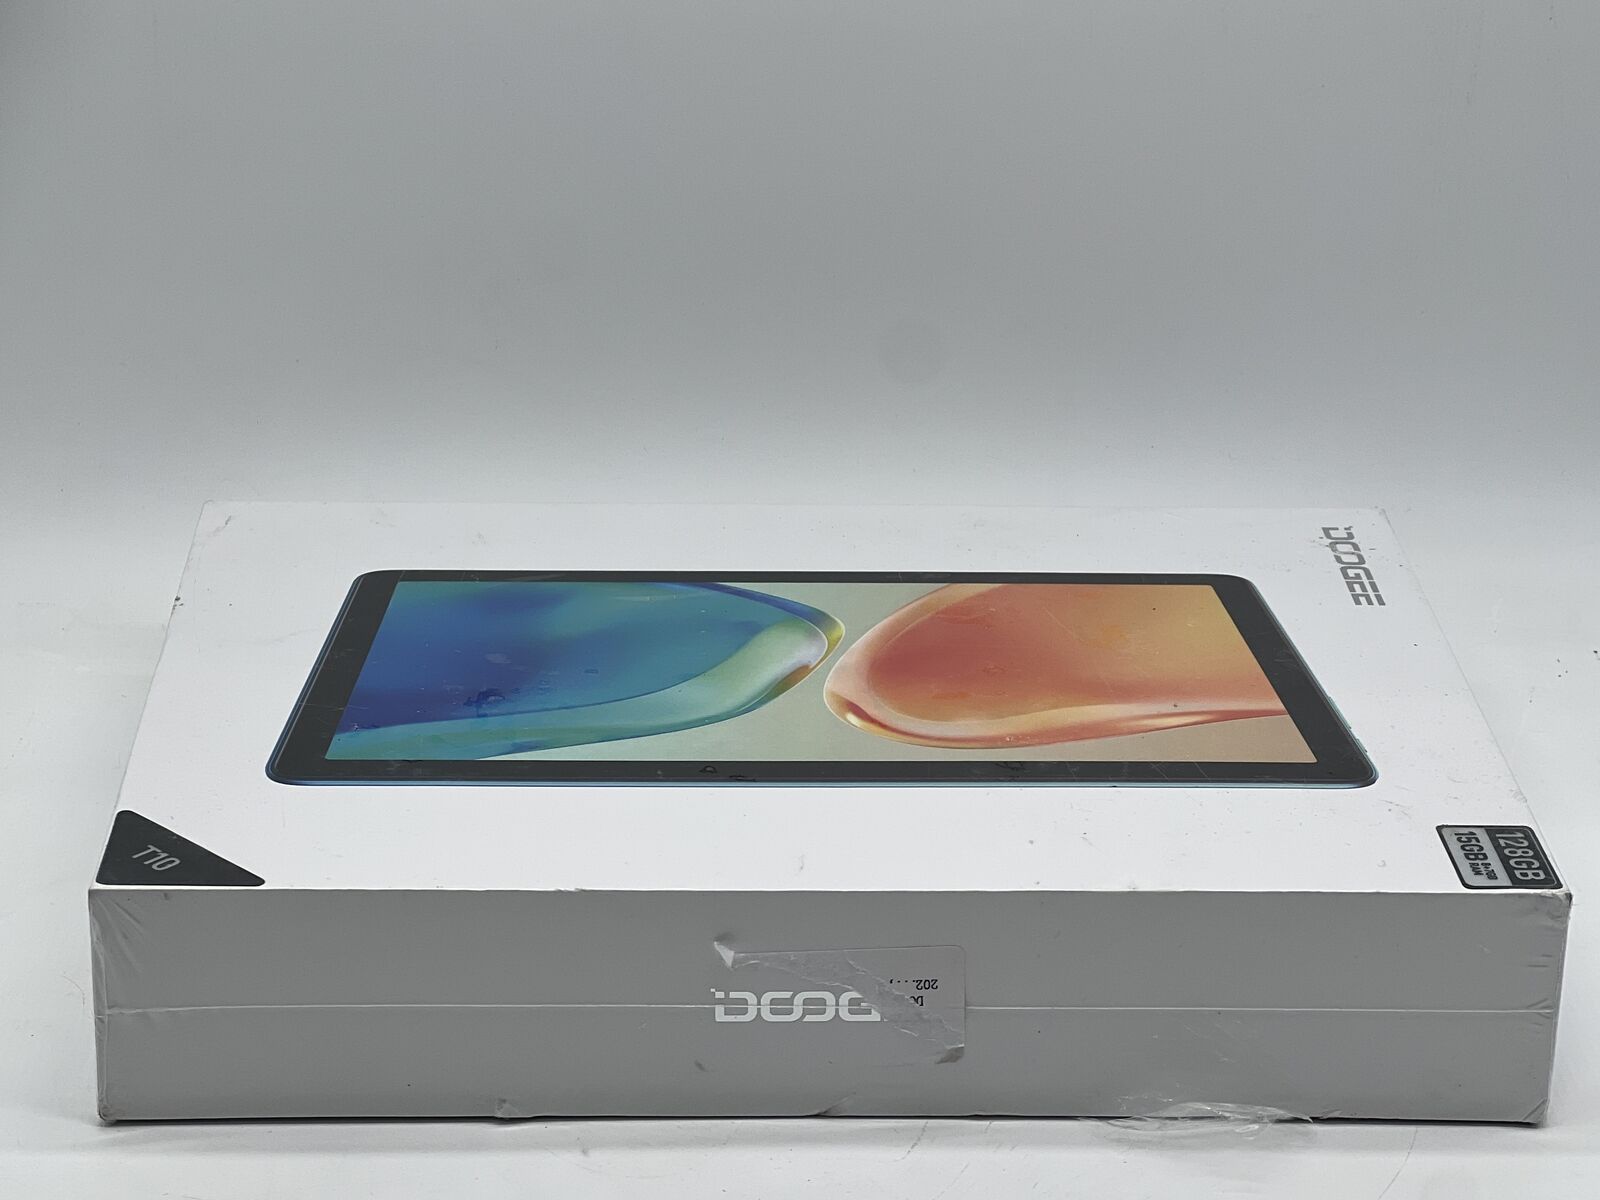 Doogee T10 10.1" Android Tablet 15GB + 128GB Space Gray New Sealed 